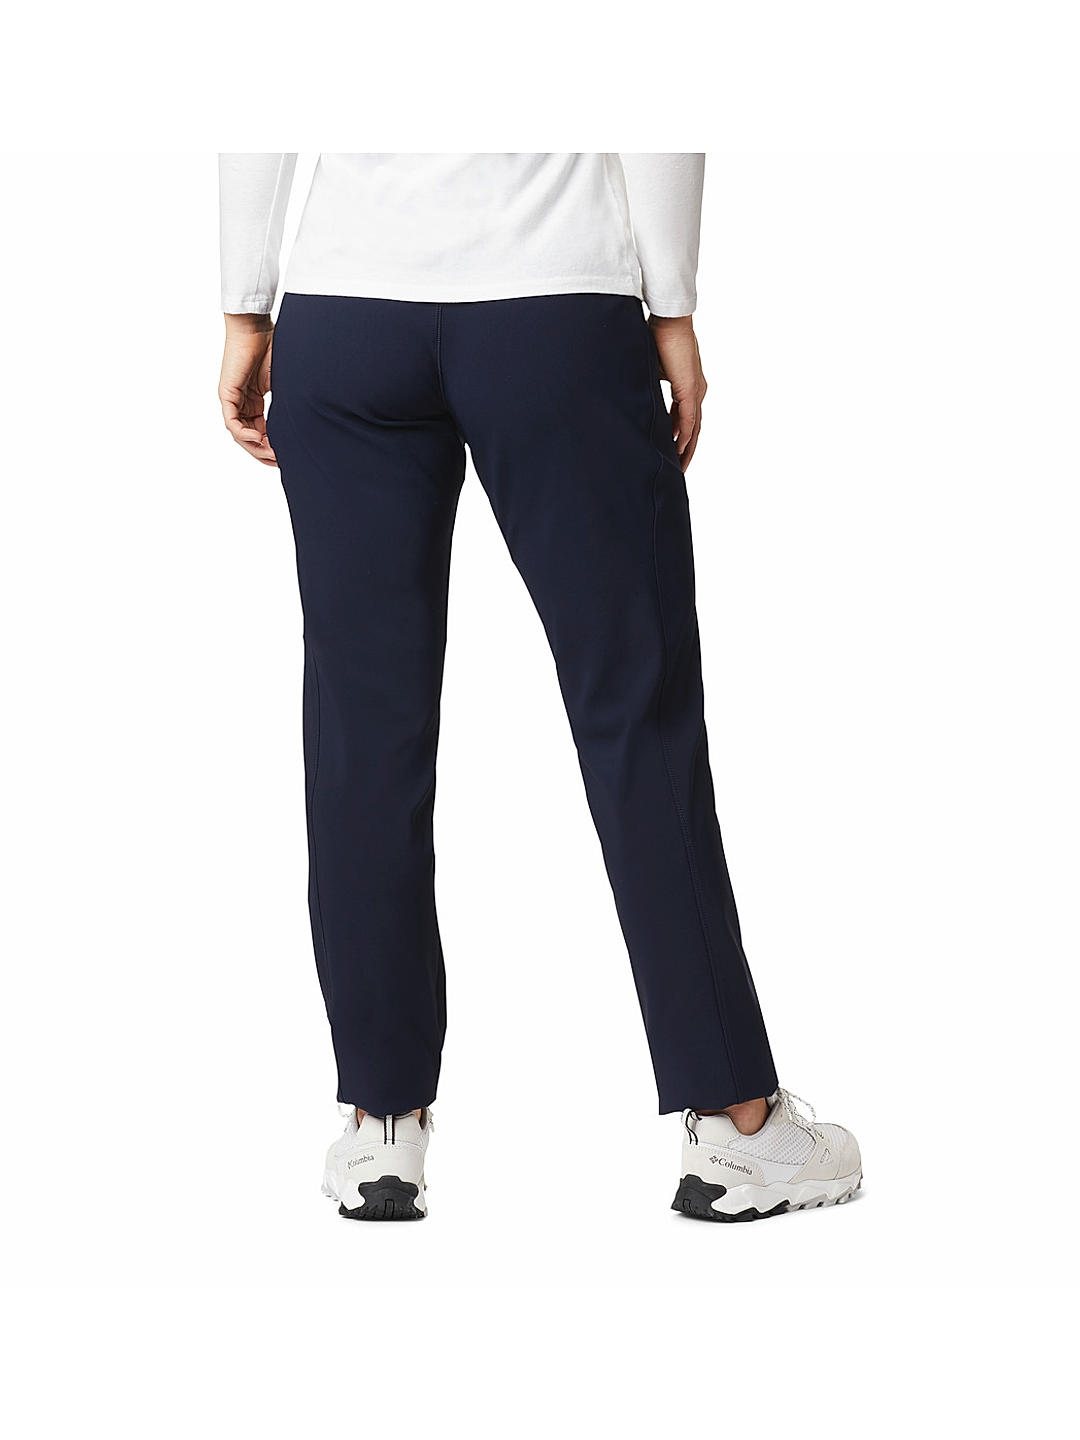 Womens Golf Trousers  adidas India